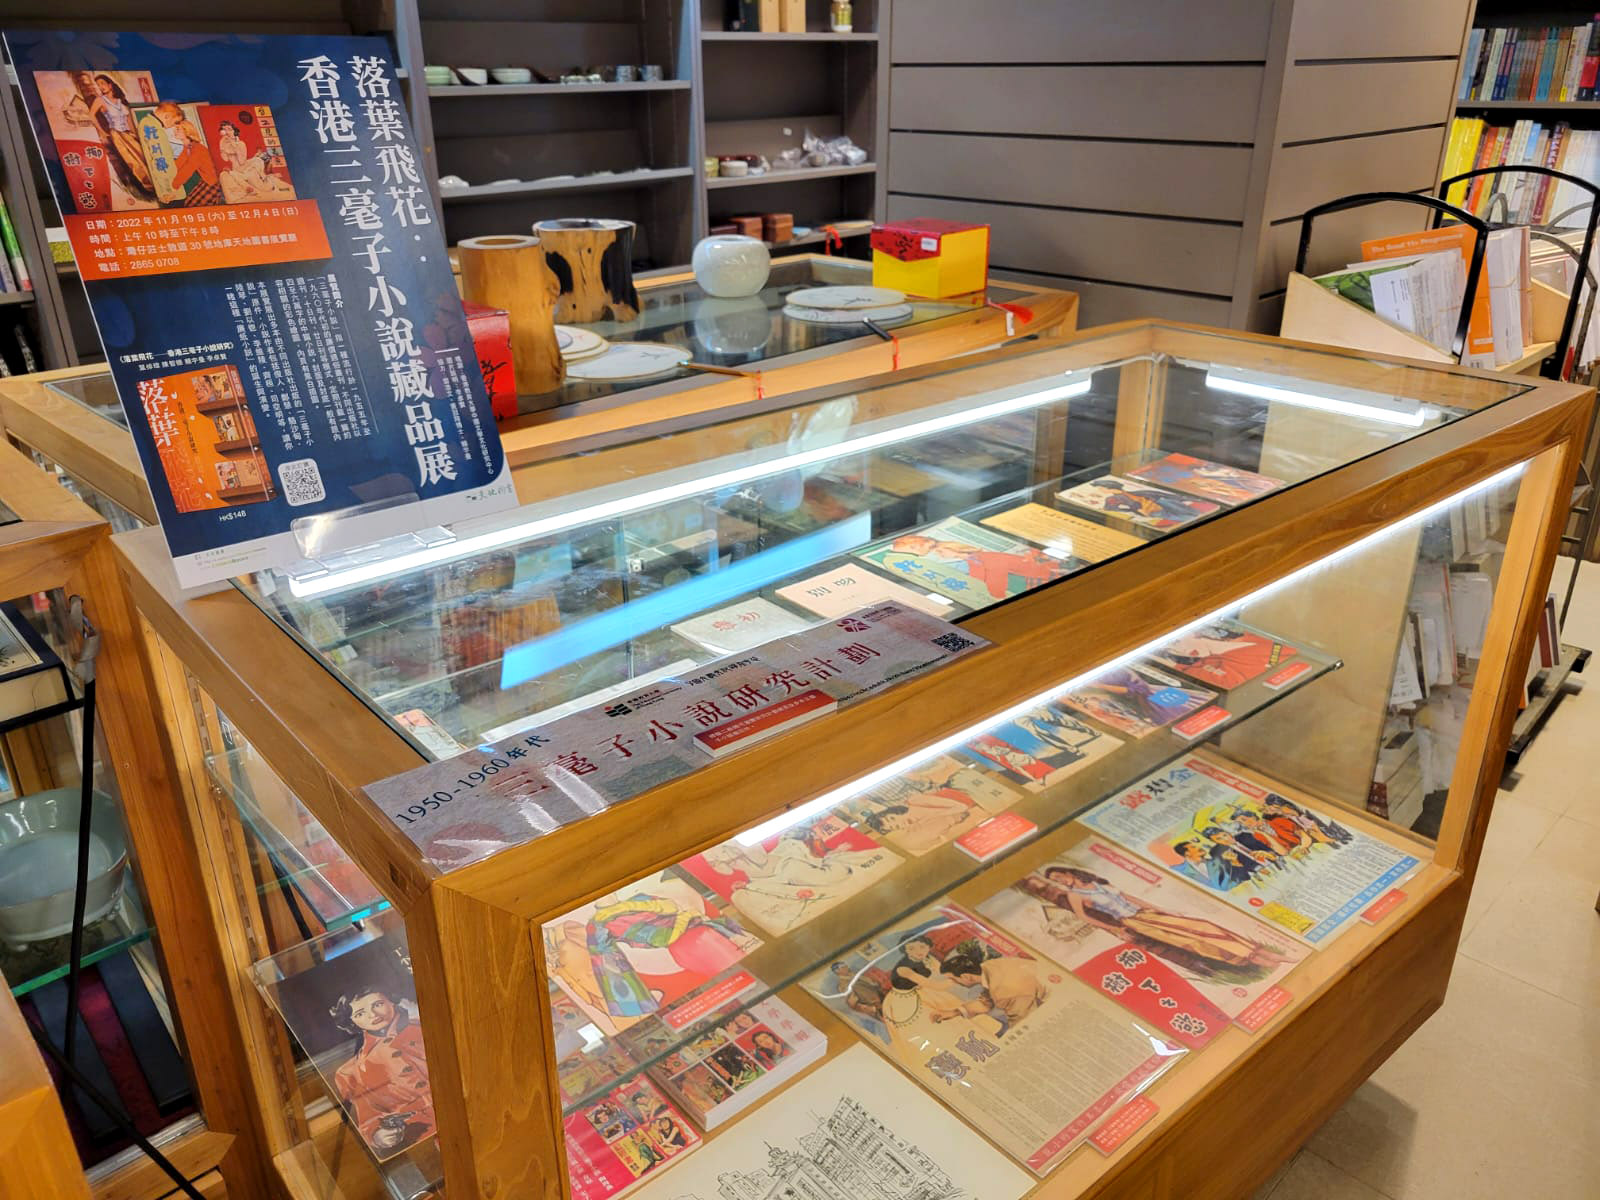 Valuable original publications were exhibited at the bookstore of Cosmos in Wan Chai